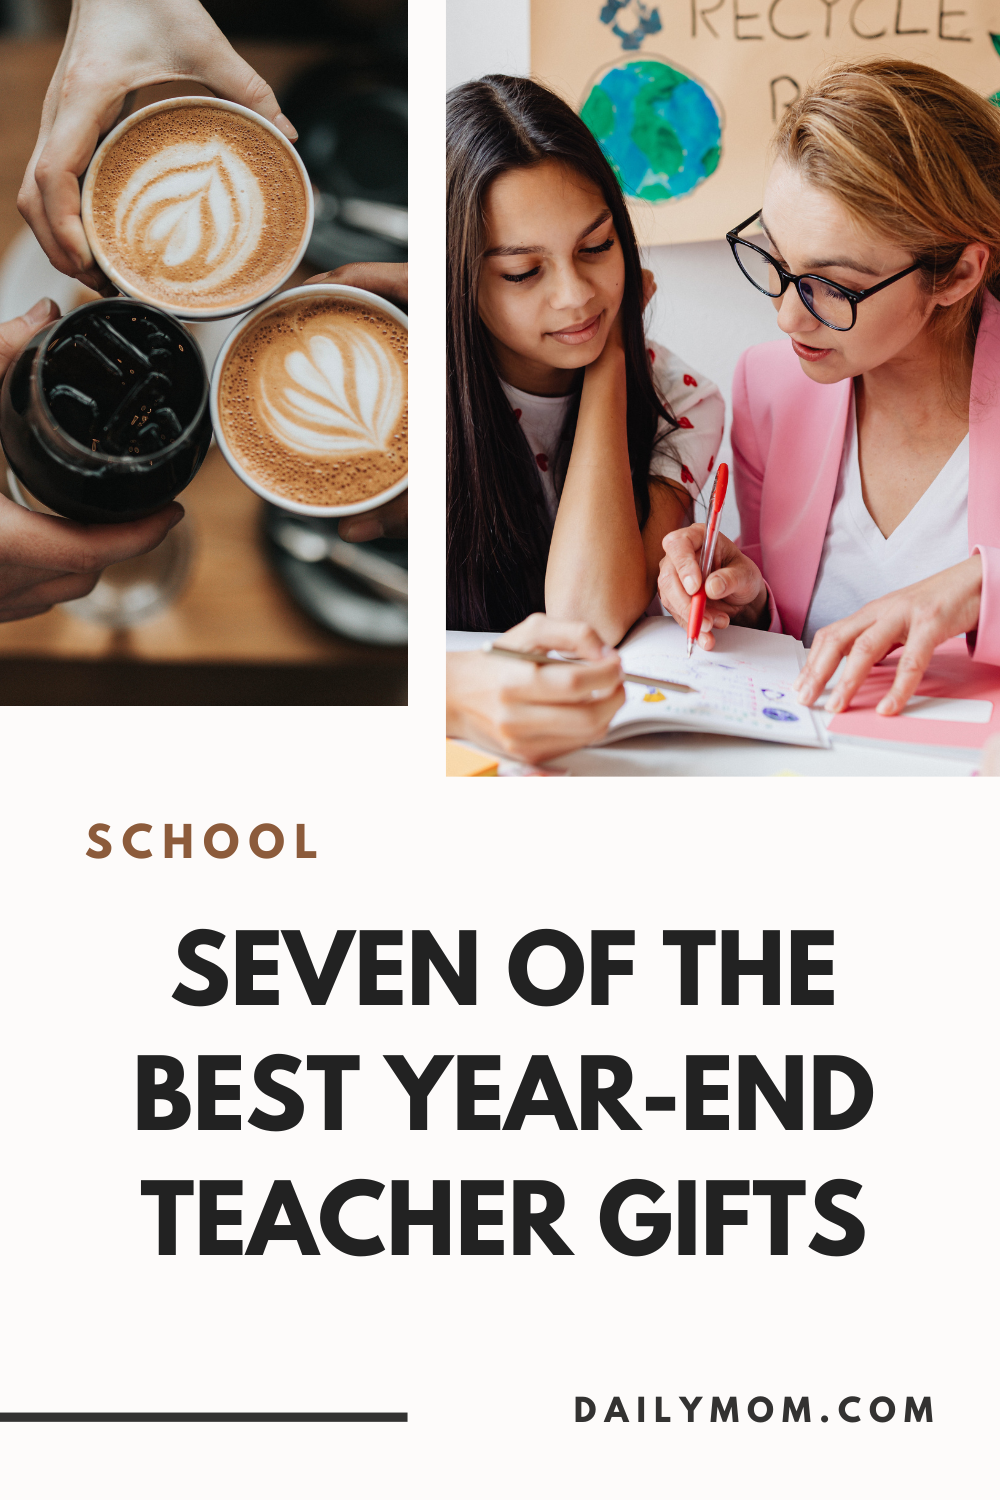 7 Of The Best Year-end Teacher Gifts (and Three Of The Worst) From A Teacher's Perspective